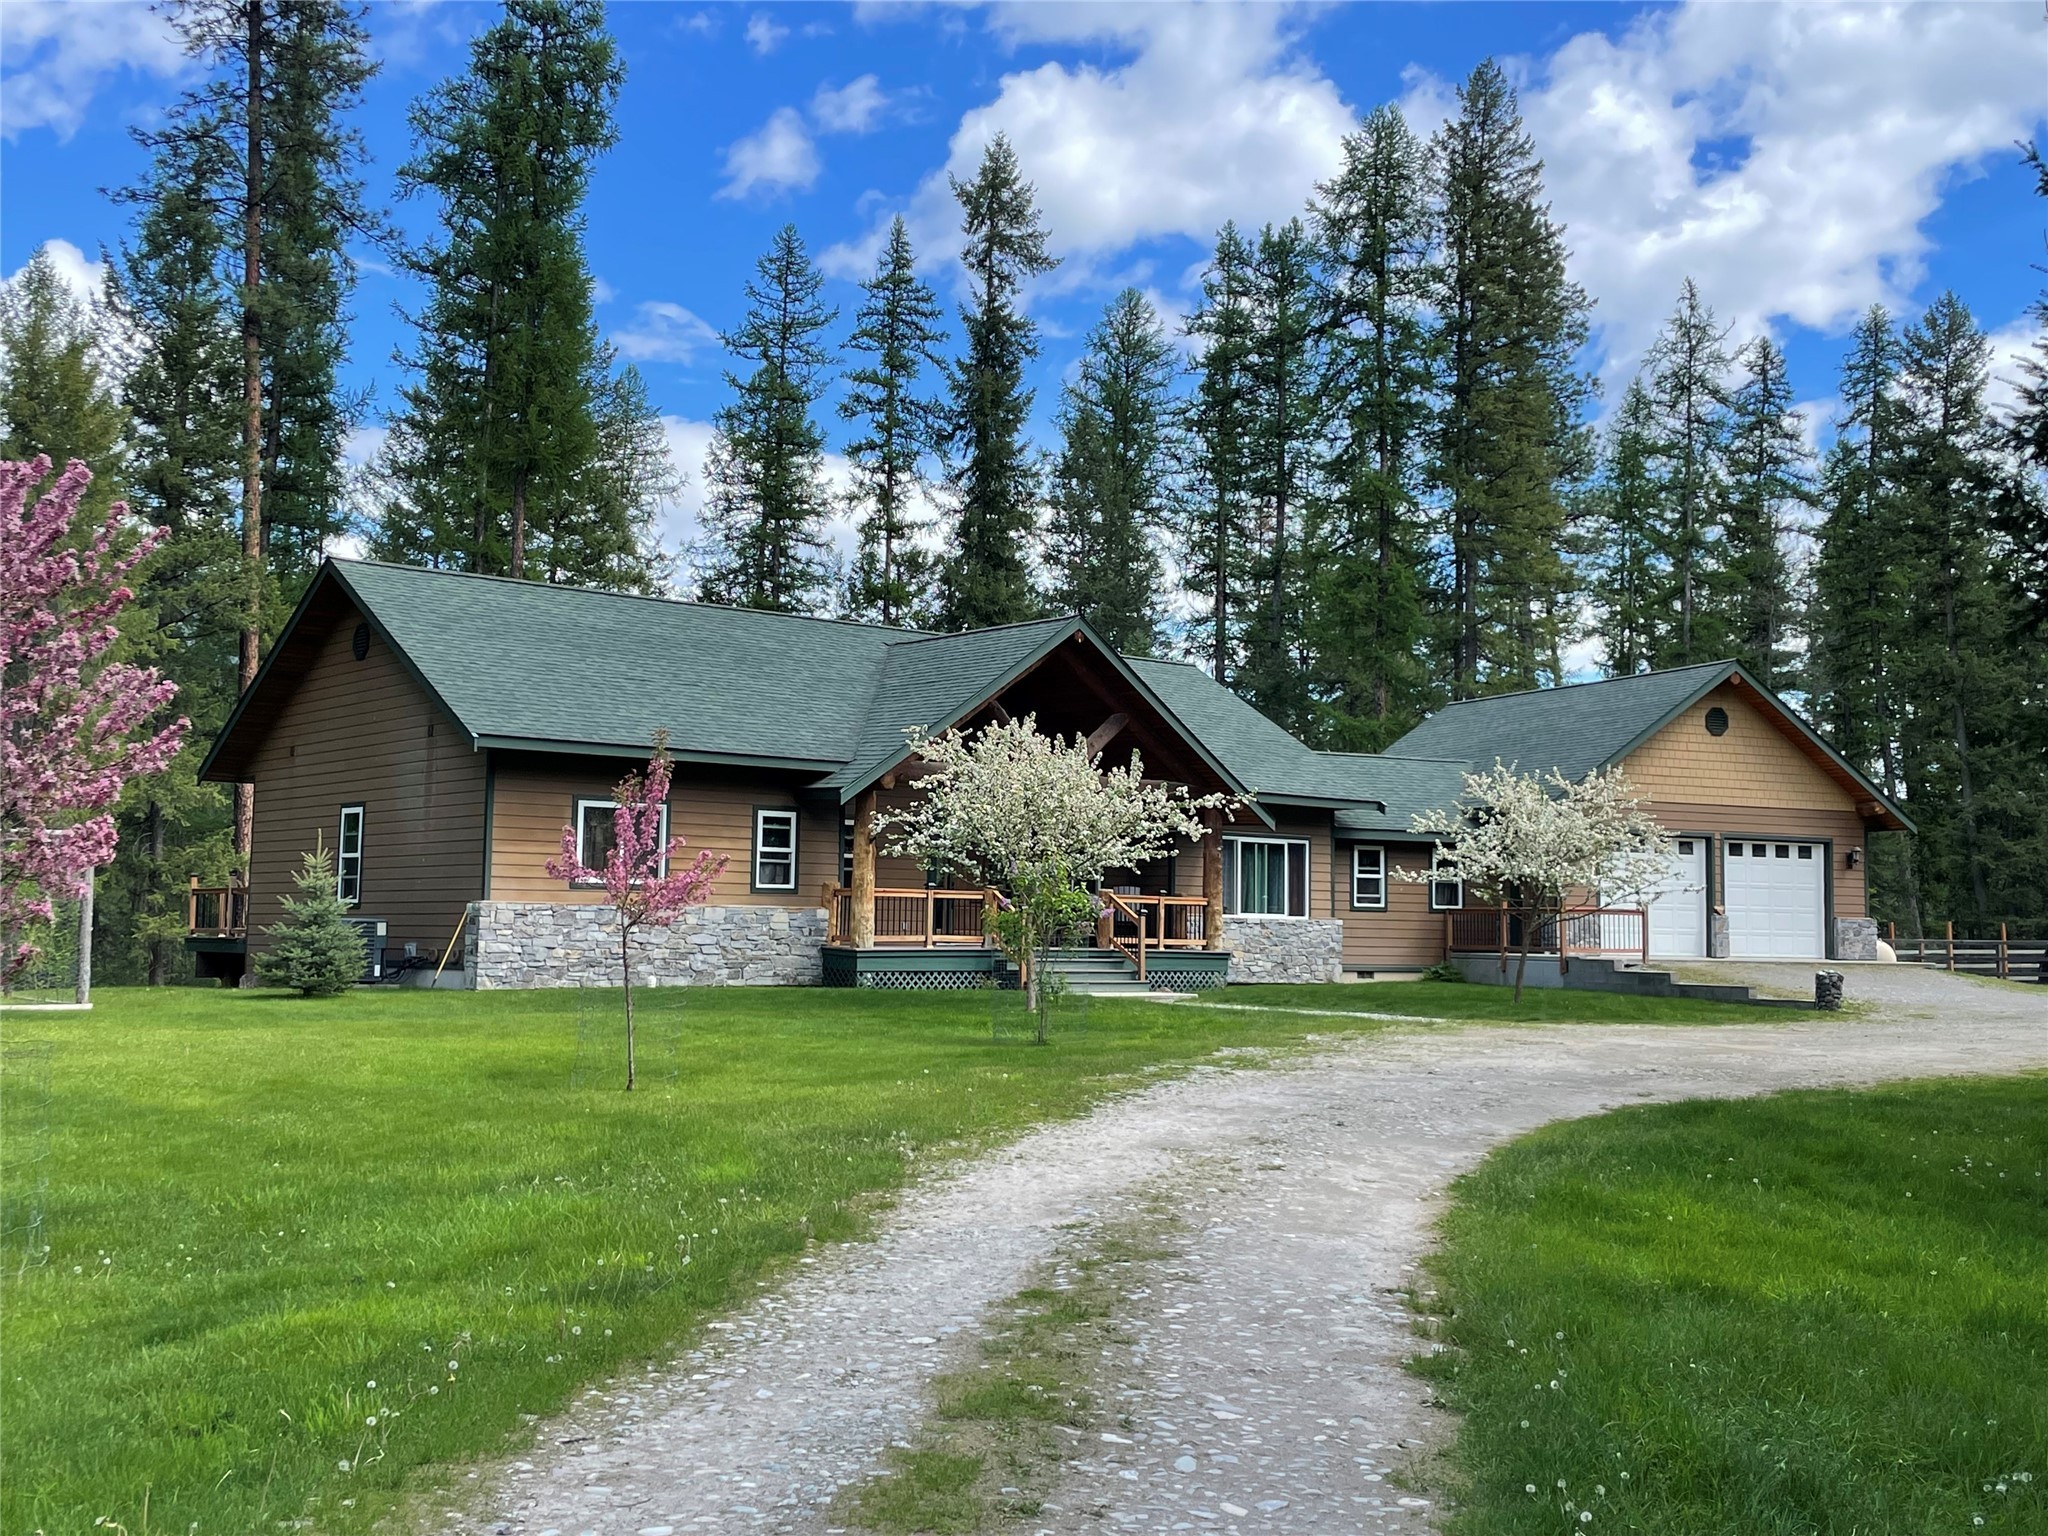 Don't miss this rare opportunity to own an exceptionally private 10+ acres along the Noxon Reservoir of the Clark Fork River, with 750+ feet of Avista frontage! This custom built 3,500+ sf home has a spacious and welcoming floor plan with a gorgeous kitchen with two islands, granite counters, vaulted ceilings, hardwood rustic sawn floors and a breakfast nook. Living space features a double-sided propane fireplace, alder doors, crown moulding, updated windows and a large, low-maintenance Trex deck with views of the river.  Master bedroom has French doors opening to deck and river views, which has been built to accommodate a hot tub. Both bathrooms feature jacuzzi tubs. Home has a propane forced air heat system for each floor and central AC. The lower level includes a family room, guest bedroom, bedroom/theatre room and a bonus room/office. Special features include log accents throughout, extensive Bose sound system with built-in speakers and a sound-insulated theatre area. There is plenty of storage in this home, with a large storage room under the stairs and a second pantry/closet in the utility room. Property also has a separate building site, with additional well and septic and a 1994 manufactured home, which could be used as a guest house, with a little interior repair.  This property has a dock permit, with exceptional water views and access to the reservoir. Gardening enthusiasts will love the fenced garden with raspberries and blueberries and an orchard area, including cherry, peach and plum trees. No covenants! Spend your days enjoying abundant wildlife from your deck and enjoy the serenity of life on the river. This is truly a one-of-a-kind offering!